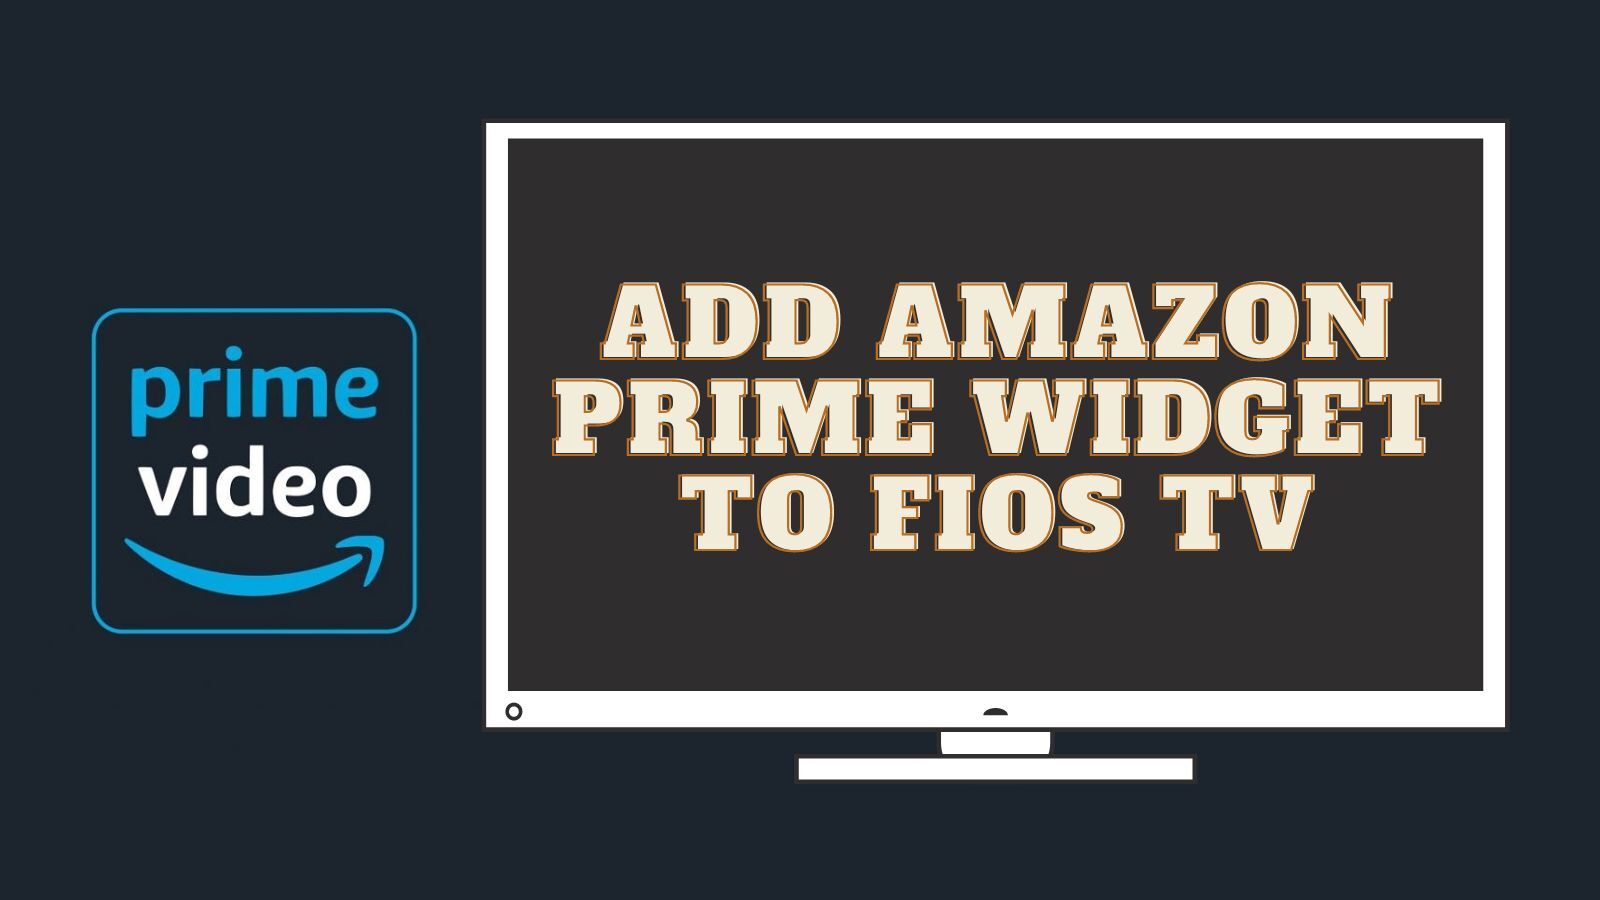 How to Add Amazon Prime Widget to Fios TV? (A Step-by-Step Guide)